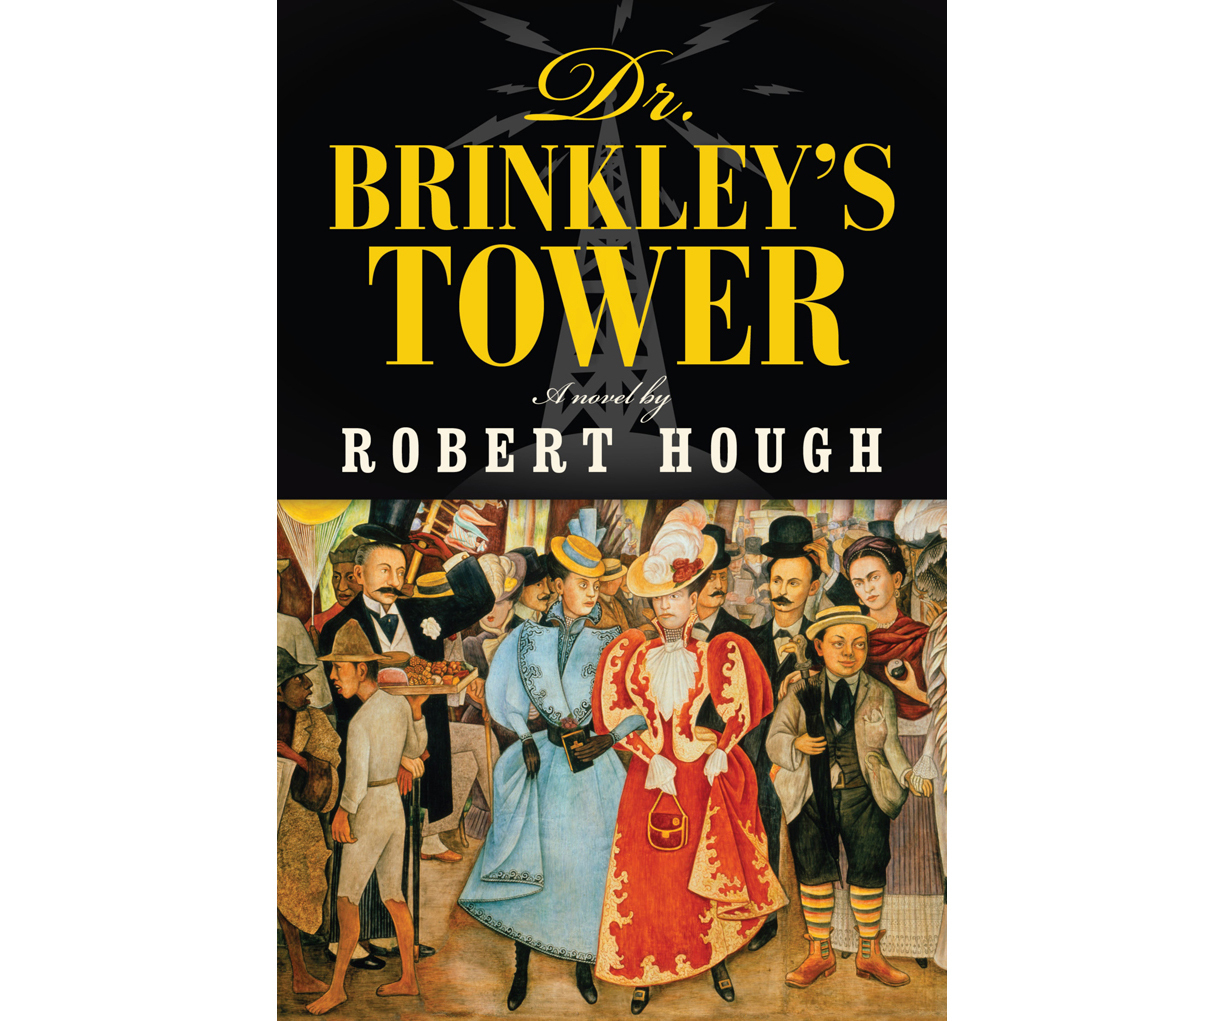 Dr. Brinkley's tower book cover